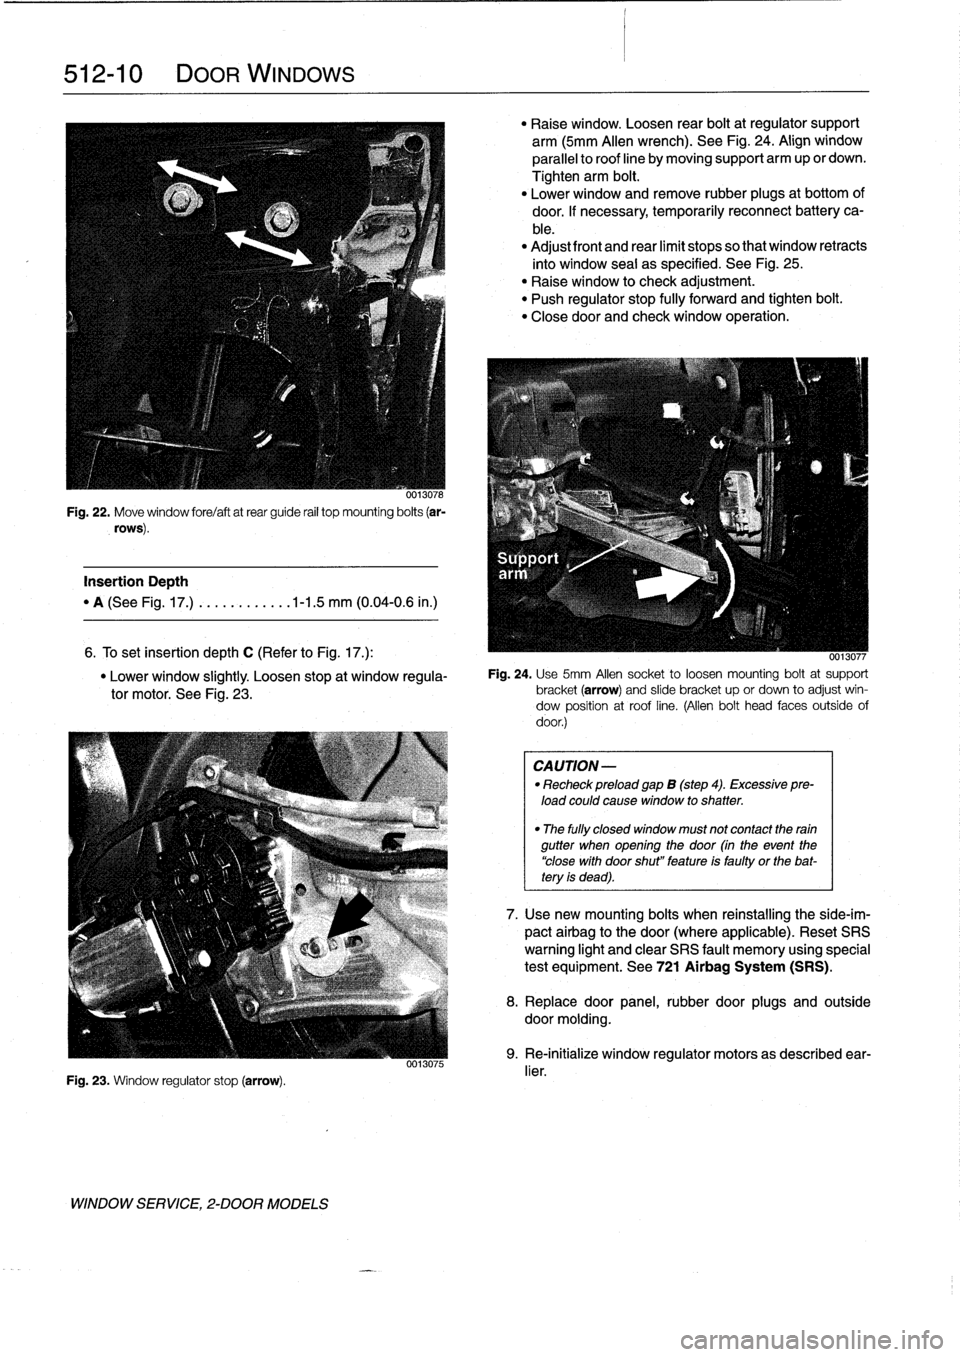 BMW 318i 1995 E36 Workshop Manual 
512-
1
0

	

DOOR
WINDOWS

0013078

Fig
.
22
.
Move
window
fore/aftatrear
guide
rail
top
mounting
bolts
(ar-

rows)
.

Insertion
Depth

"
A
(See
Fig
.
17
.)
.
..........
.1-1
.5
mm
(0
.04-0
.6
in
.)
